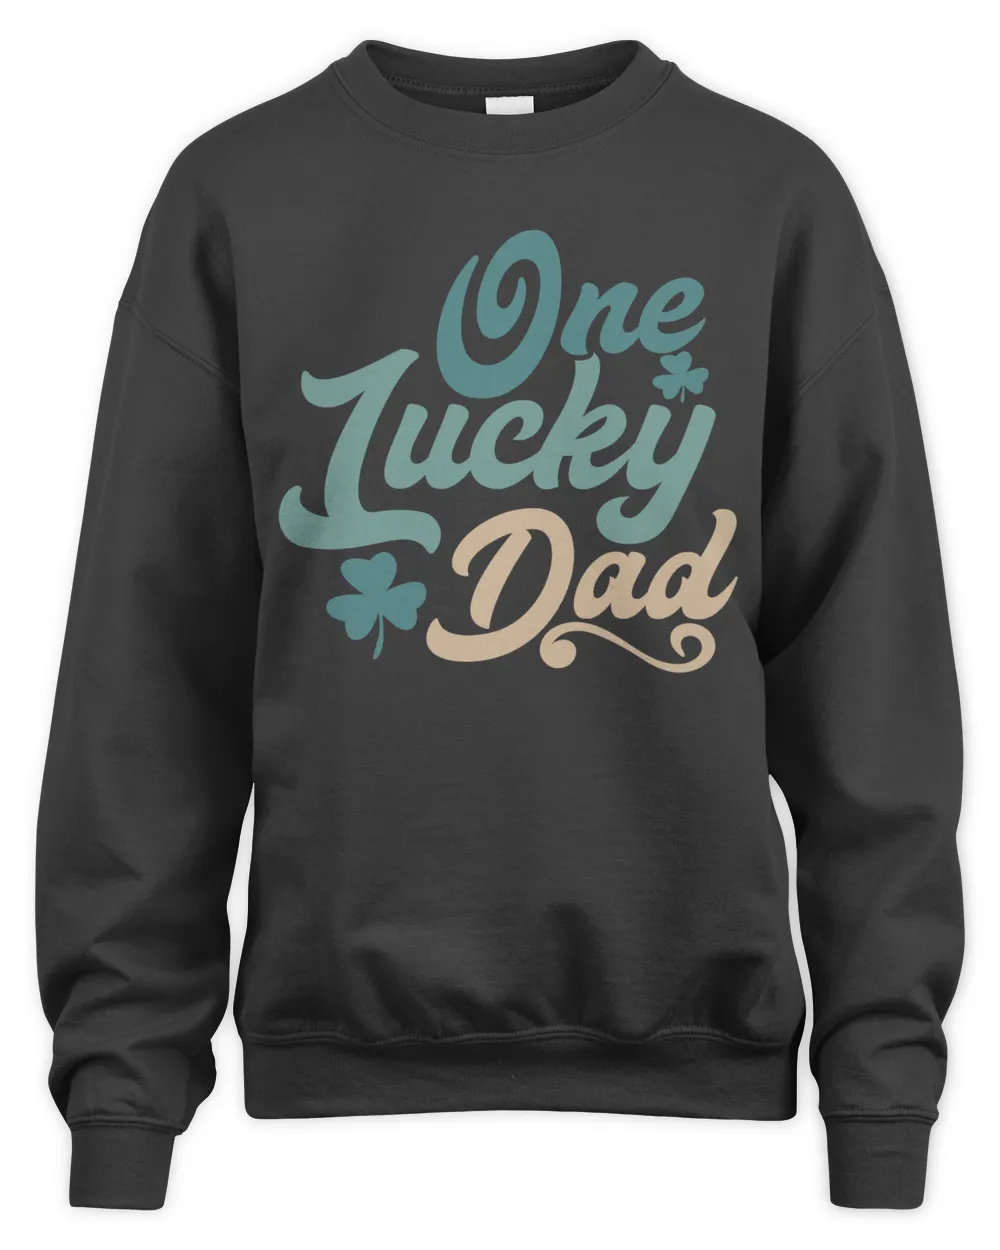 One Lucky Dad Shirt, Fathers day Shirt Sweatshirt Hoodie, Fathers day Shirt Idea,  Father's Day t Shirts NLSFD022